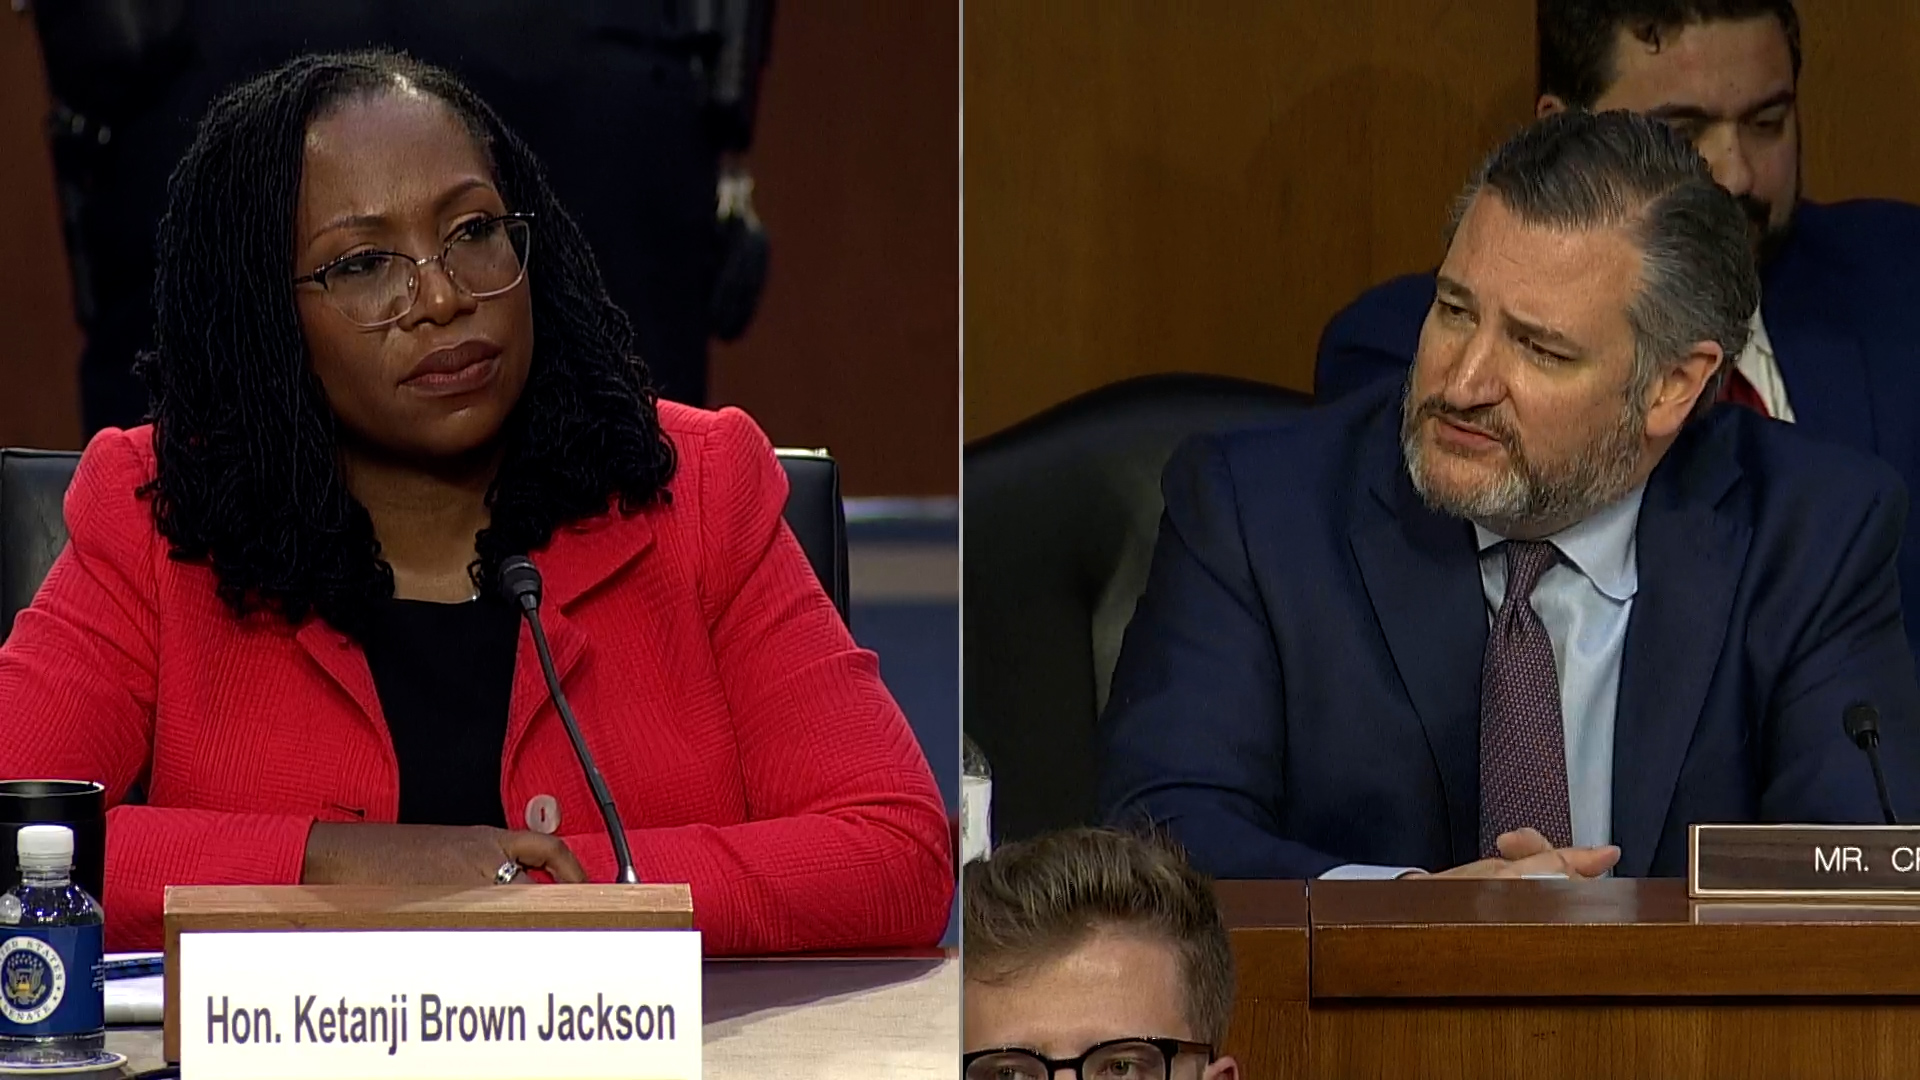 Rape Sexy Video2019 - The child pornography case at the center of Ketanji Brown Jackson's  confirmation hearing - The Washington Post